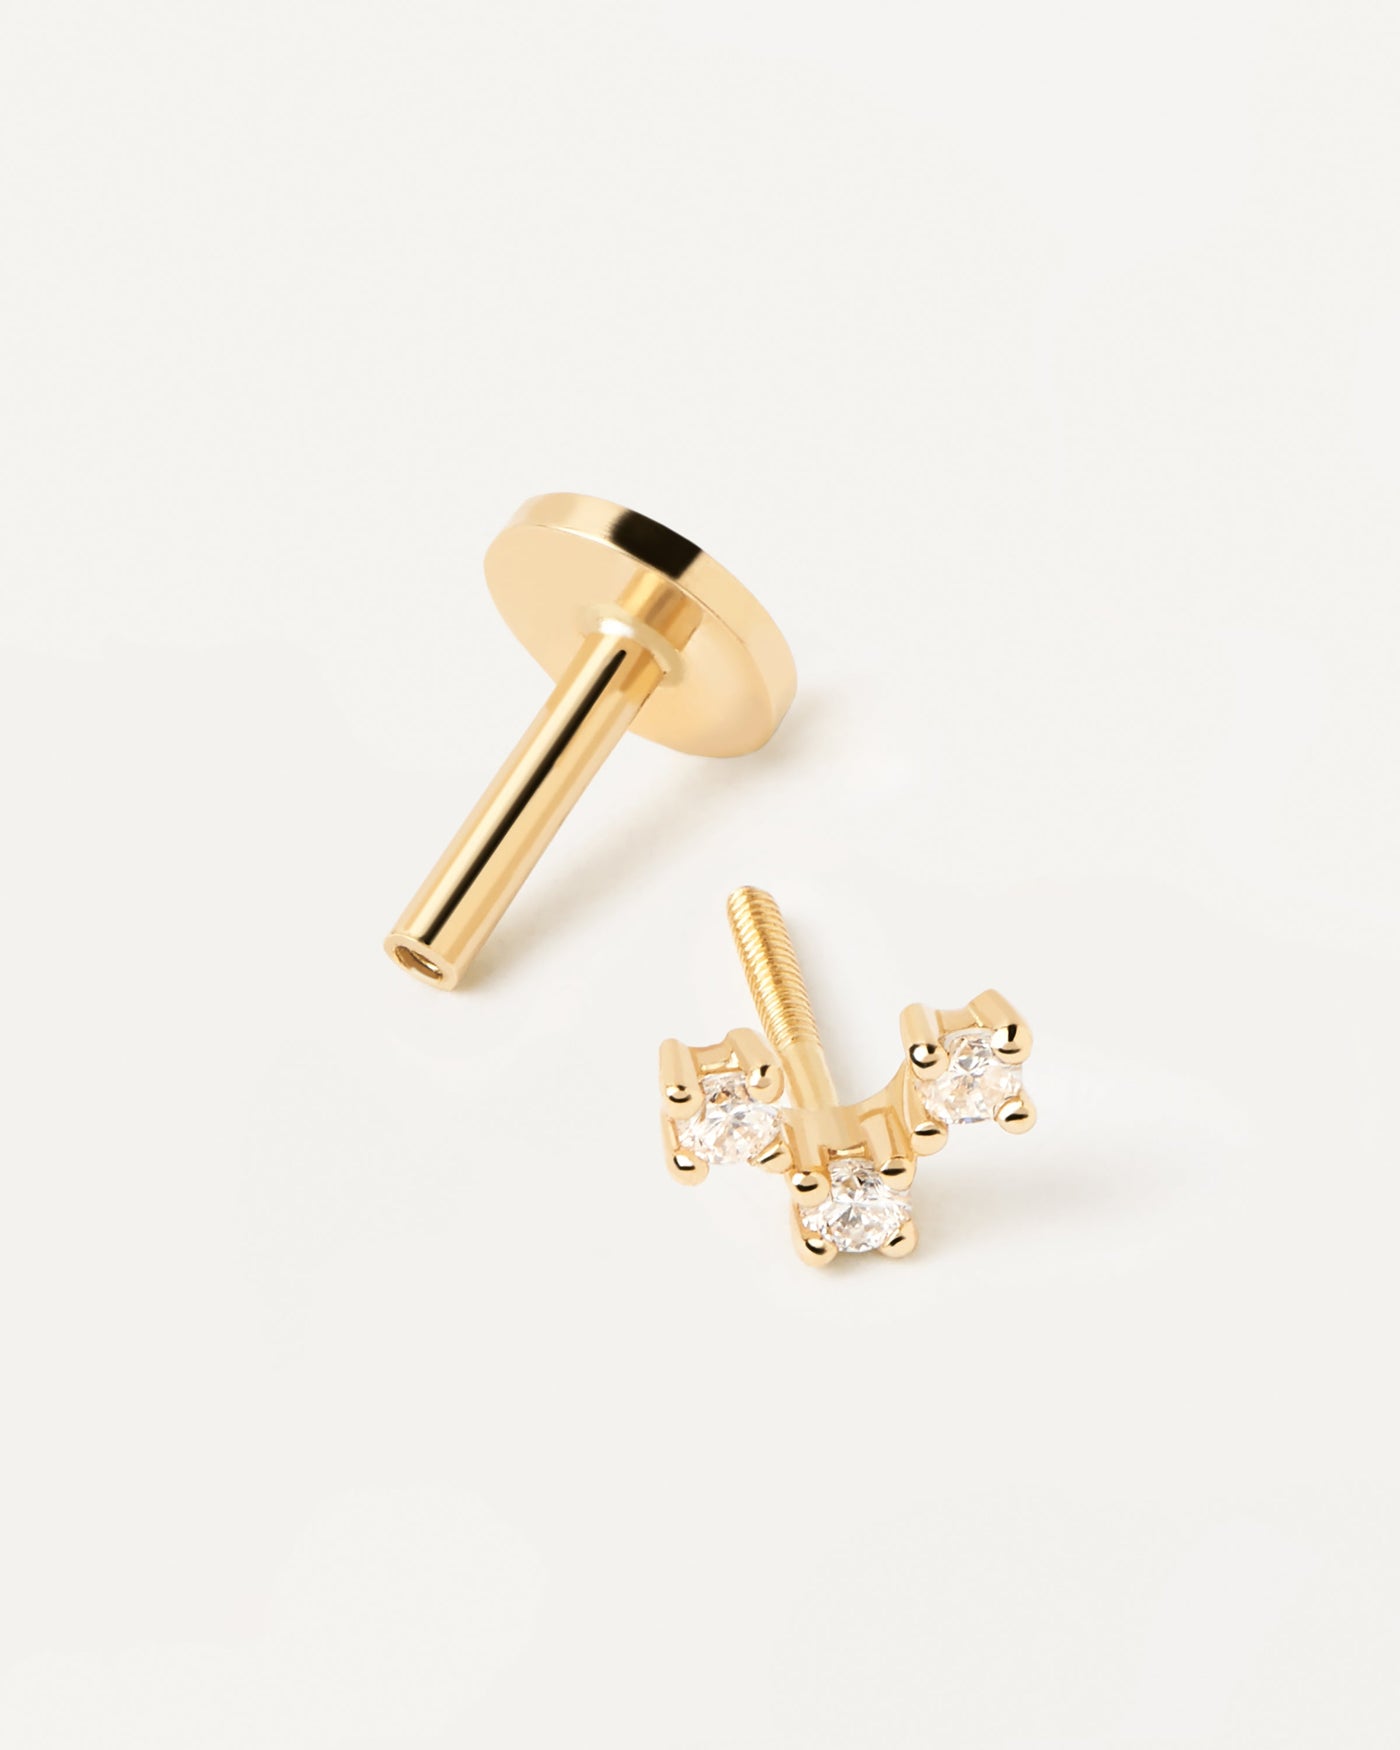 2023 Selection | Diamonds and gold Nolita Single Earring. Solid yellow gold ear piercing with diamond triangle, making 0.04 carat. Get the latest arrival from PDPAOLA. Place your order safely and get this Best Seller. Free Shipping.